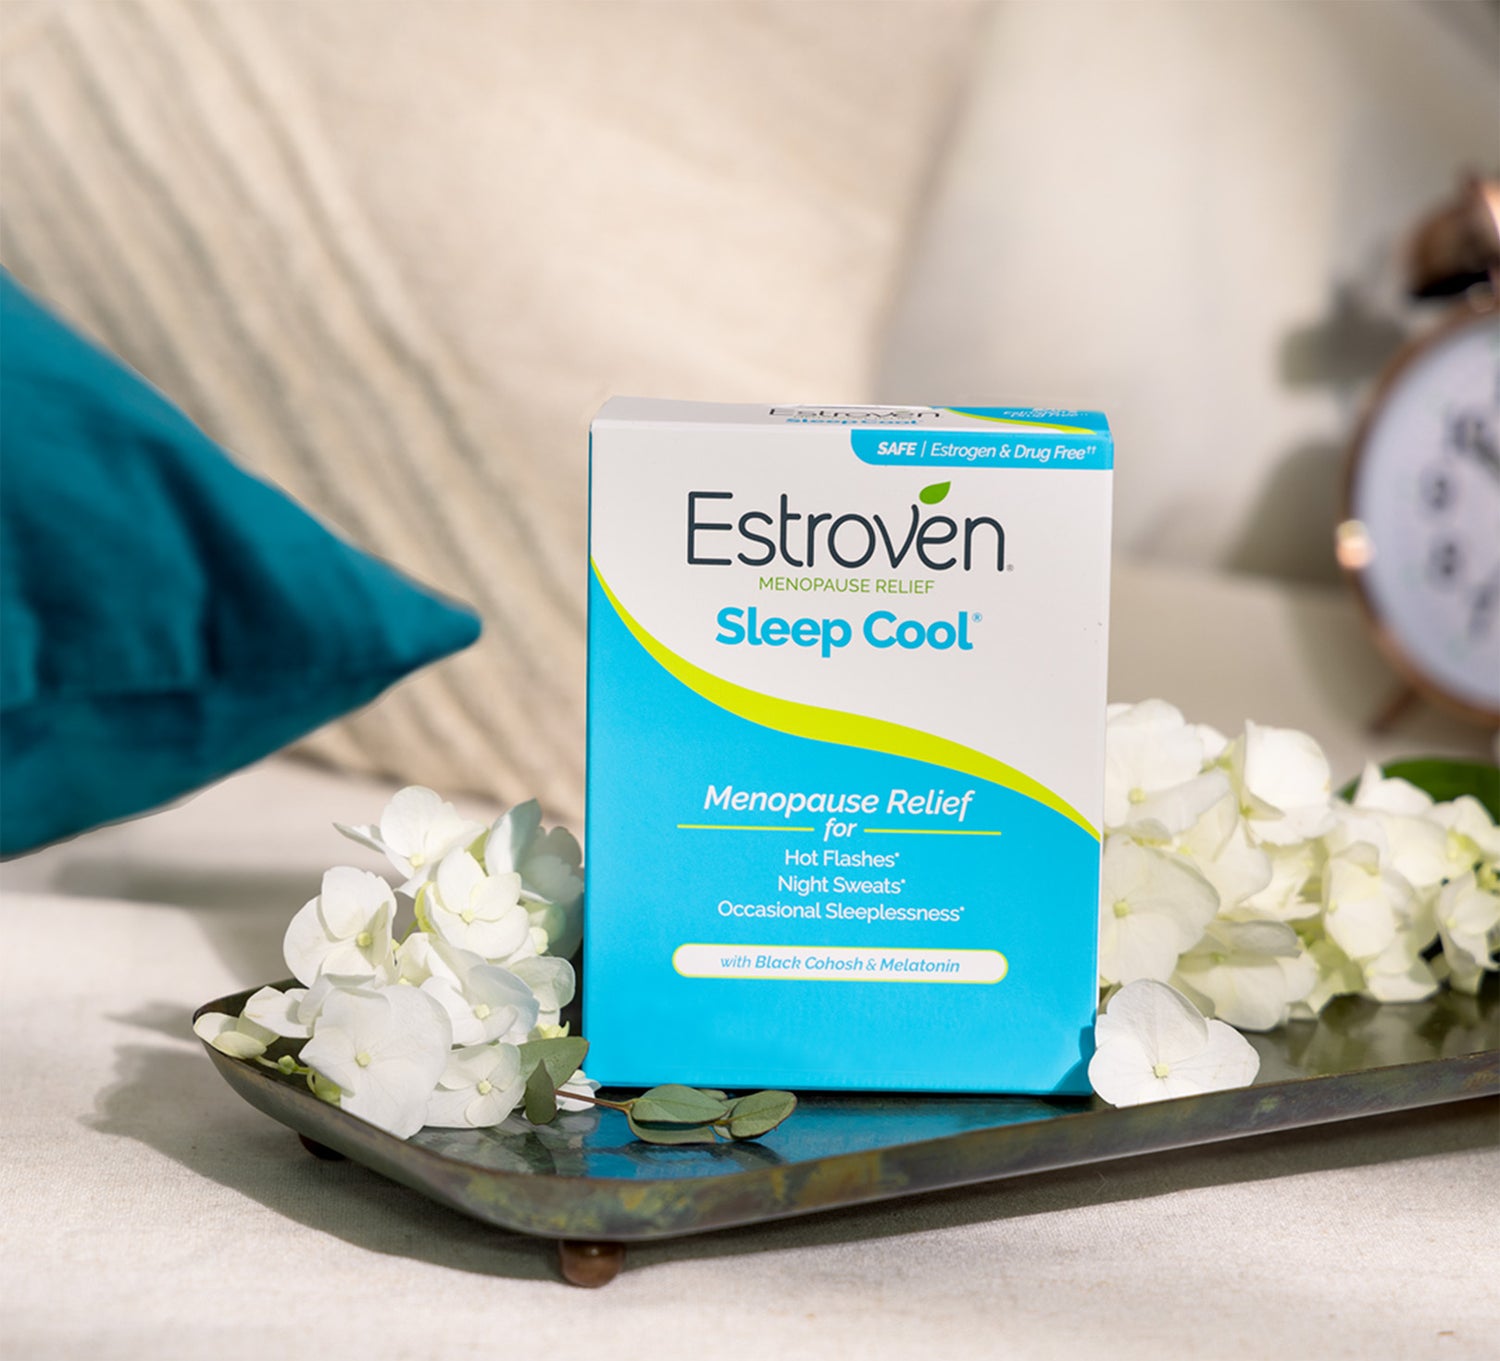 Estroven Sleep Cool product box on top of a silver platter with white flower petals